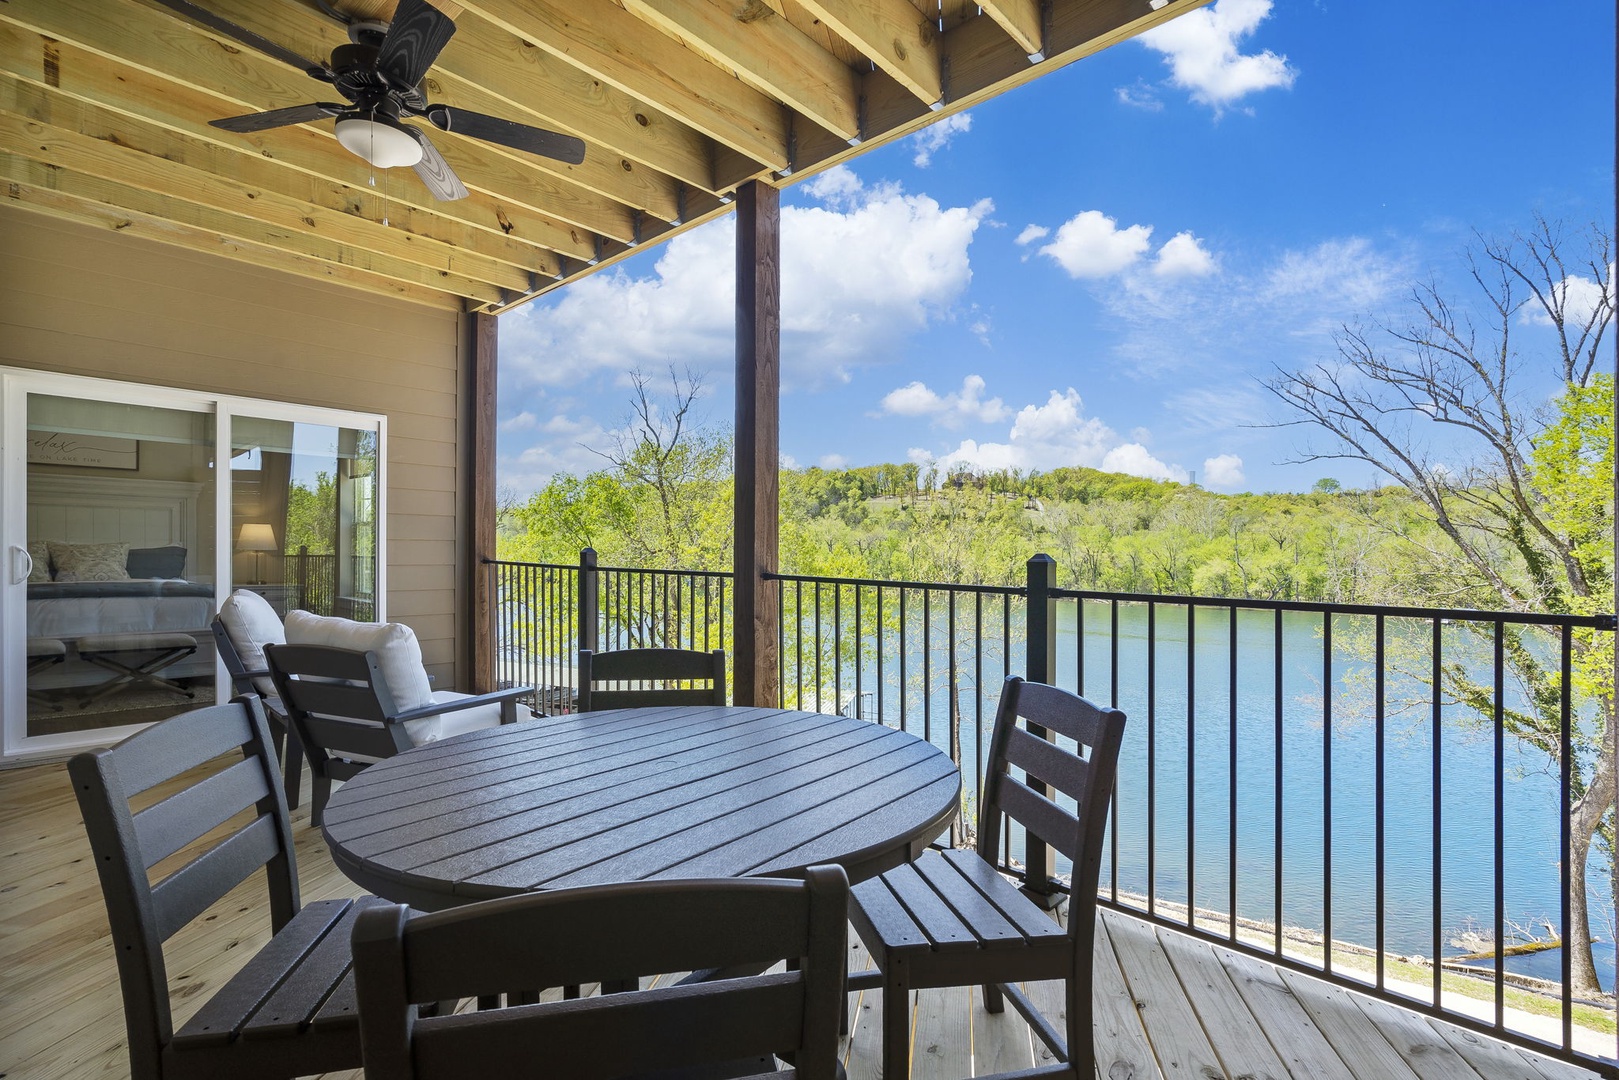 Enjoy meals outdoors with unobstructed views of beautiful Lake Taneycomo